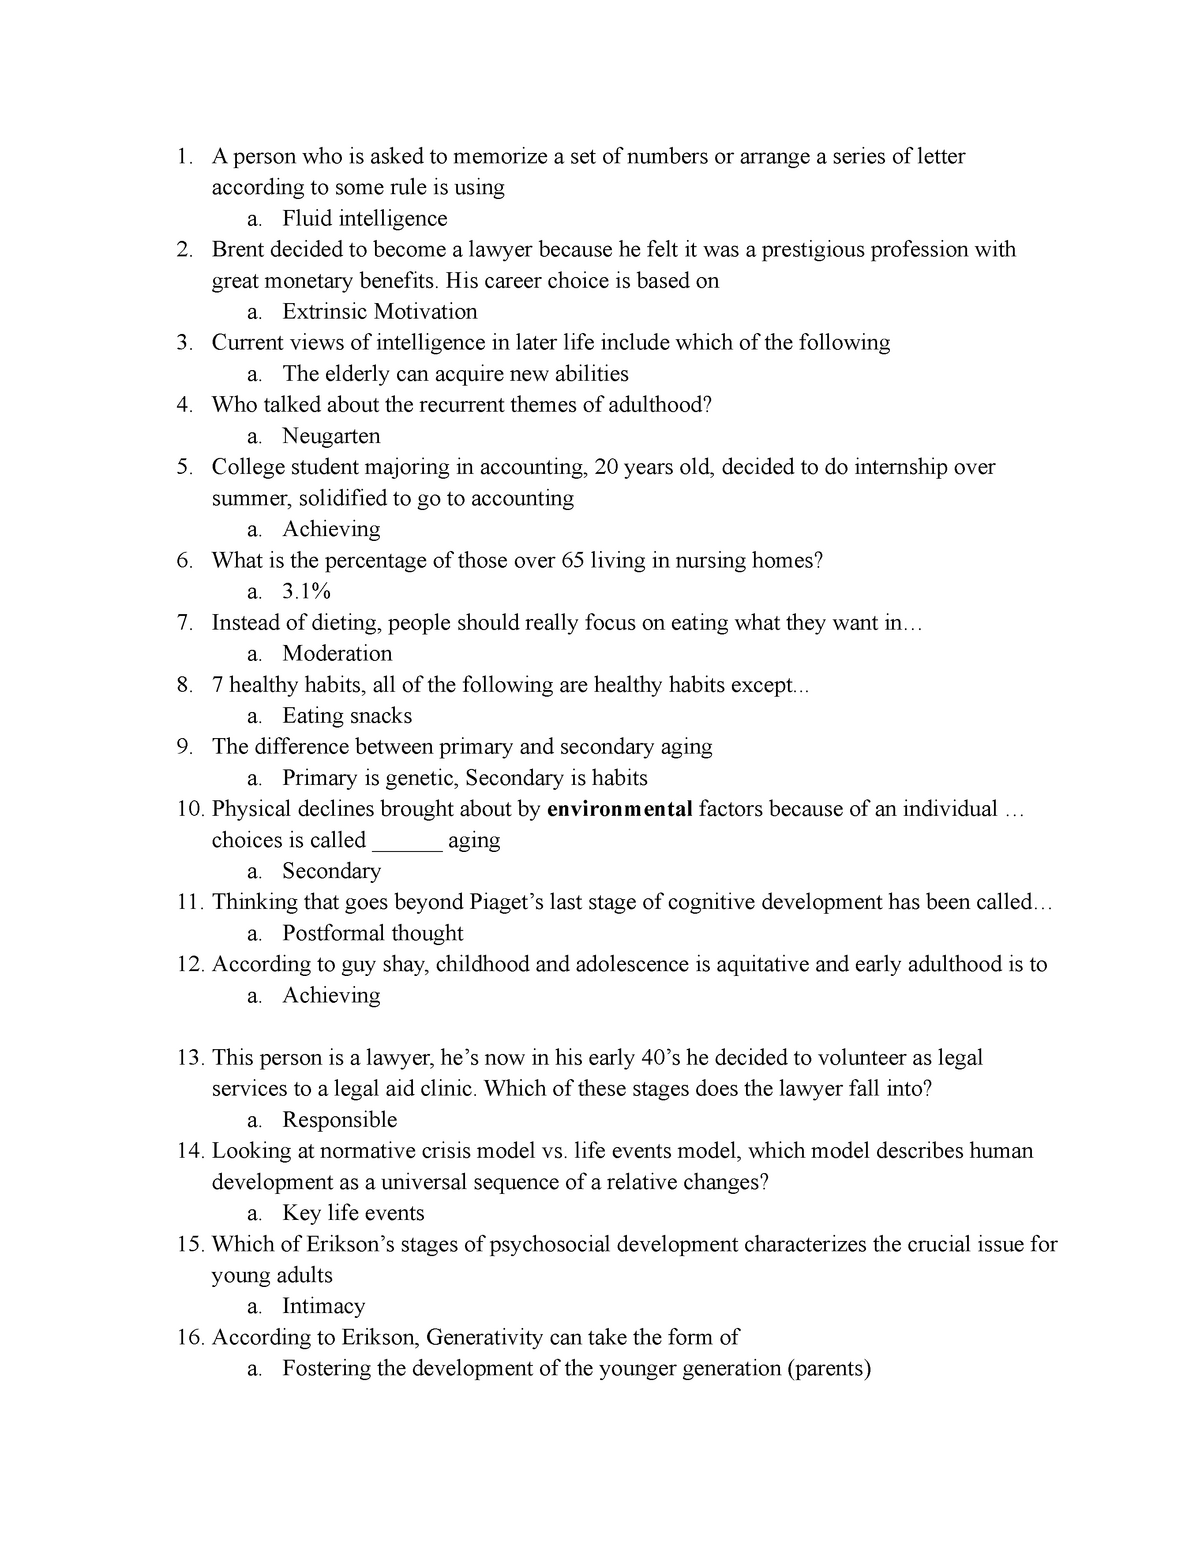 Human Development Final Exam Study Guide - 1. A person who is asked to ...